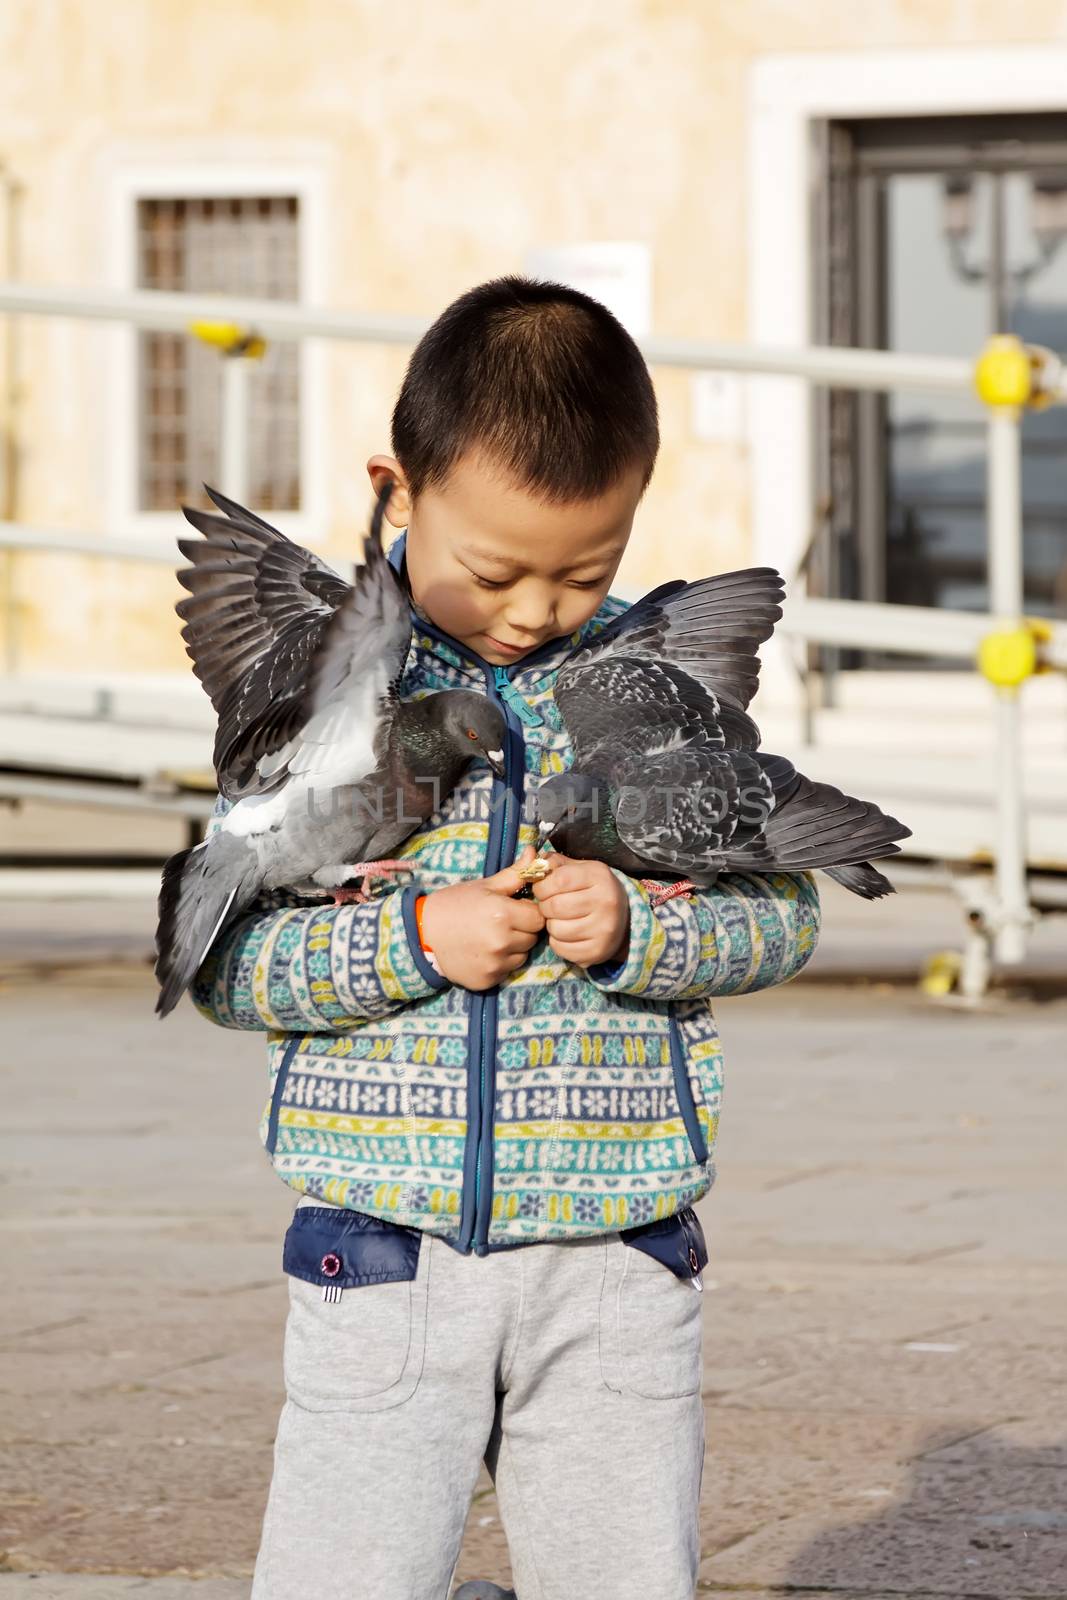 VENICE, ITALY - NOVEMBER 29, 2015: Feeding pigeons on hands of a boy on the streets of Venice, Italy